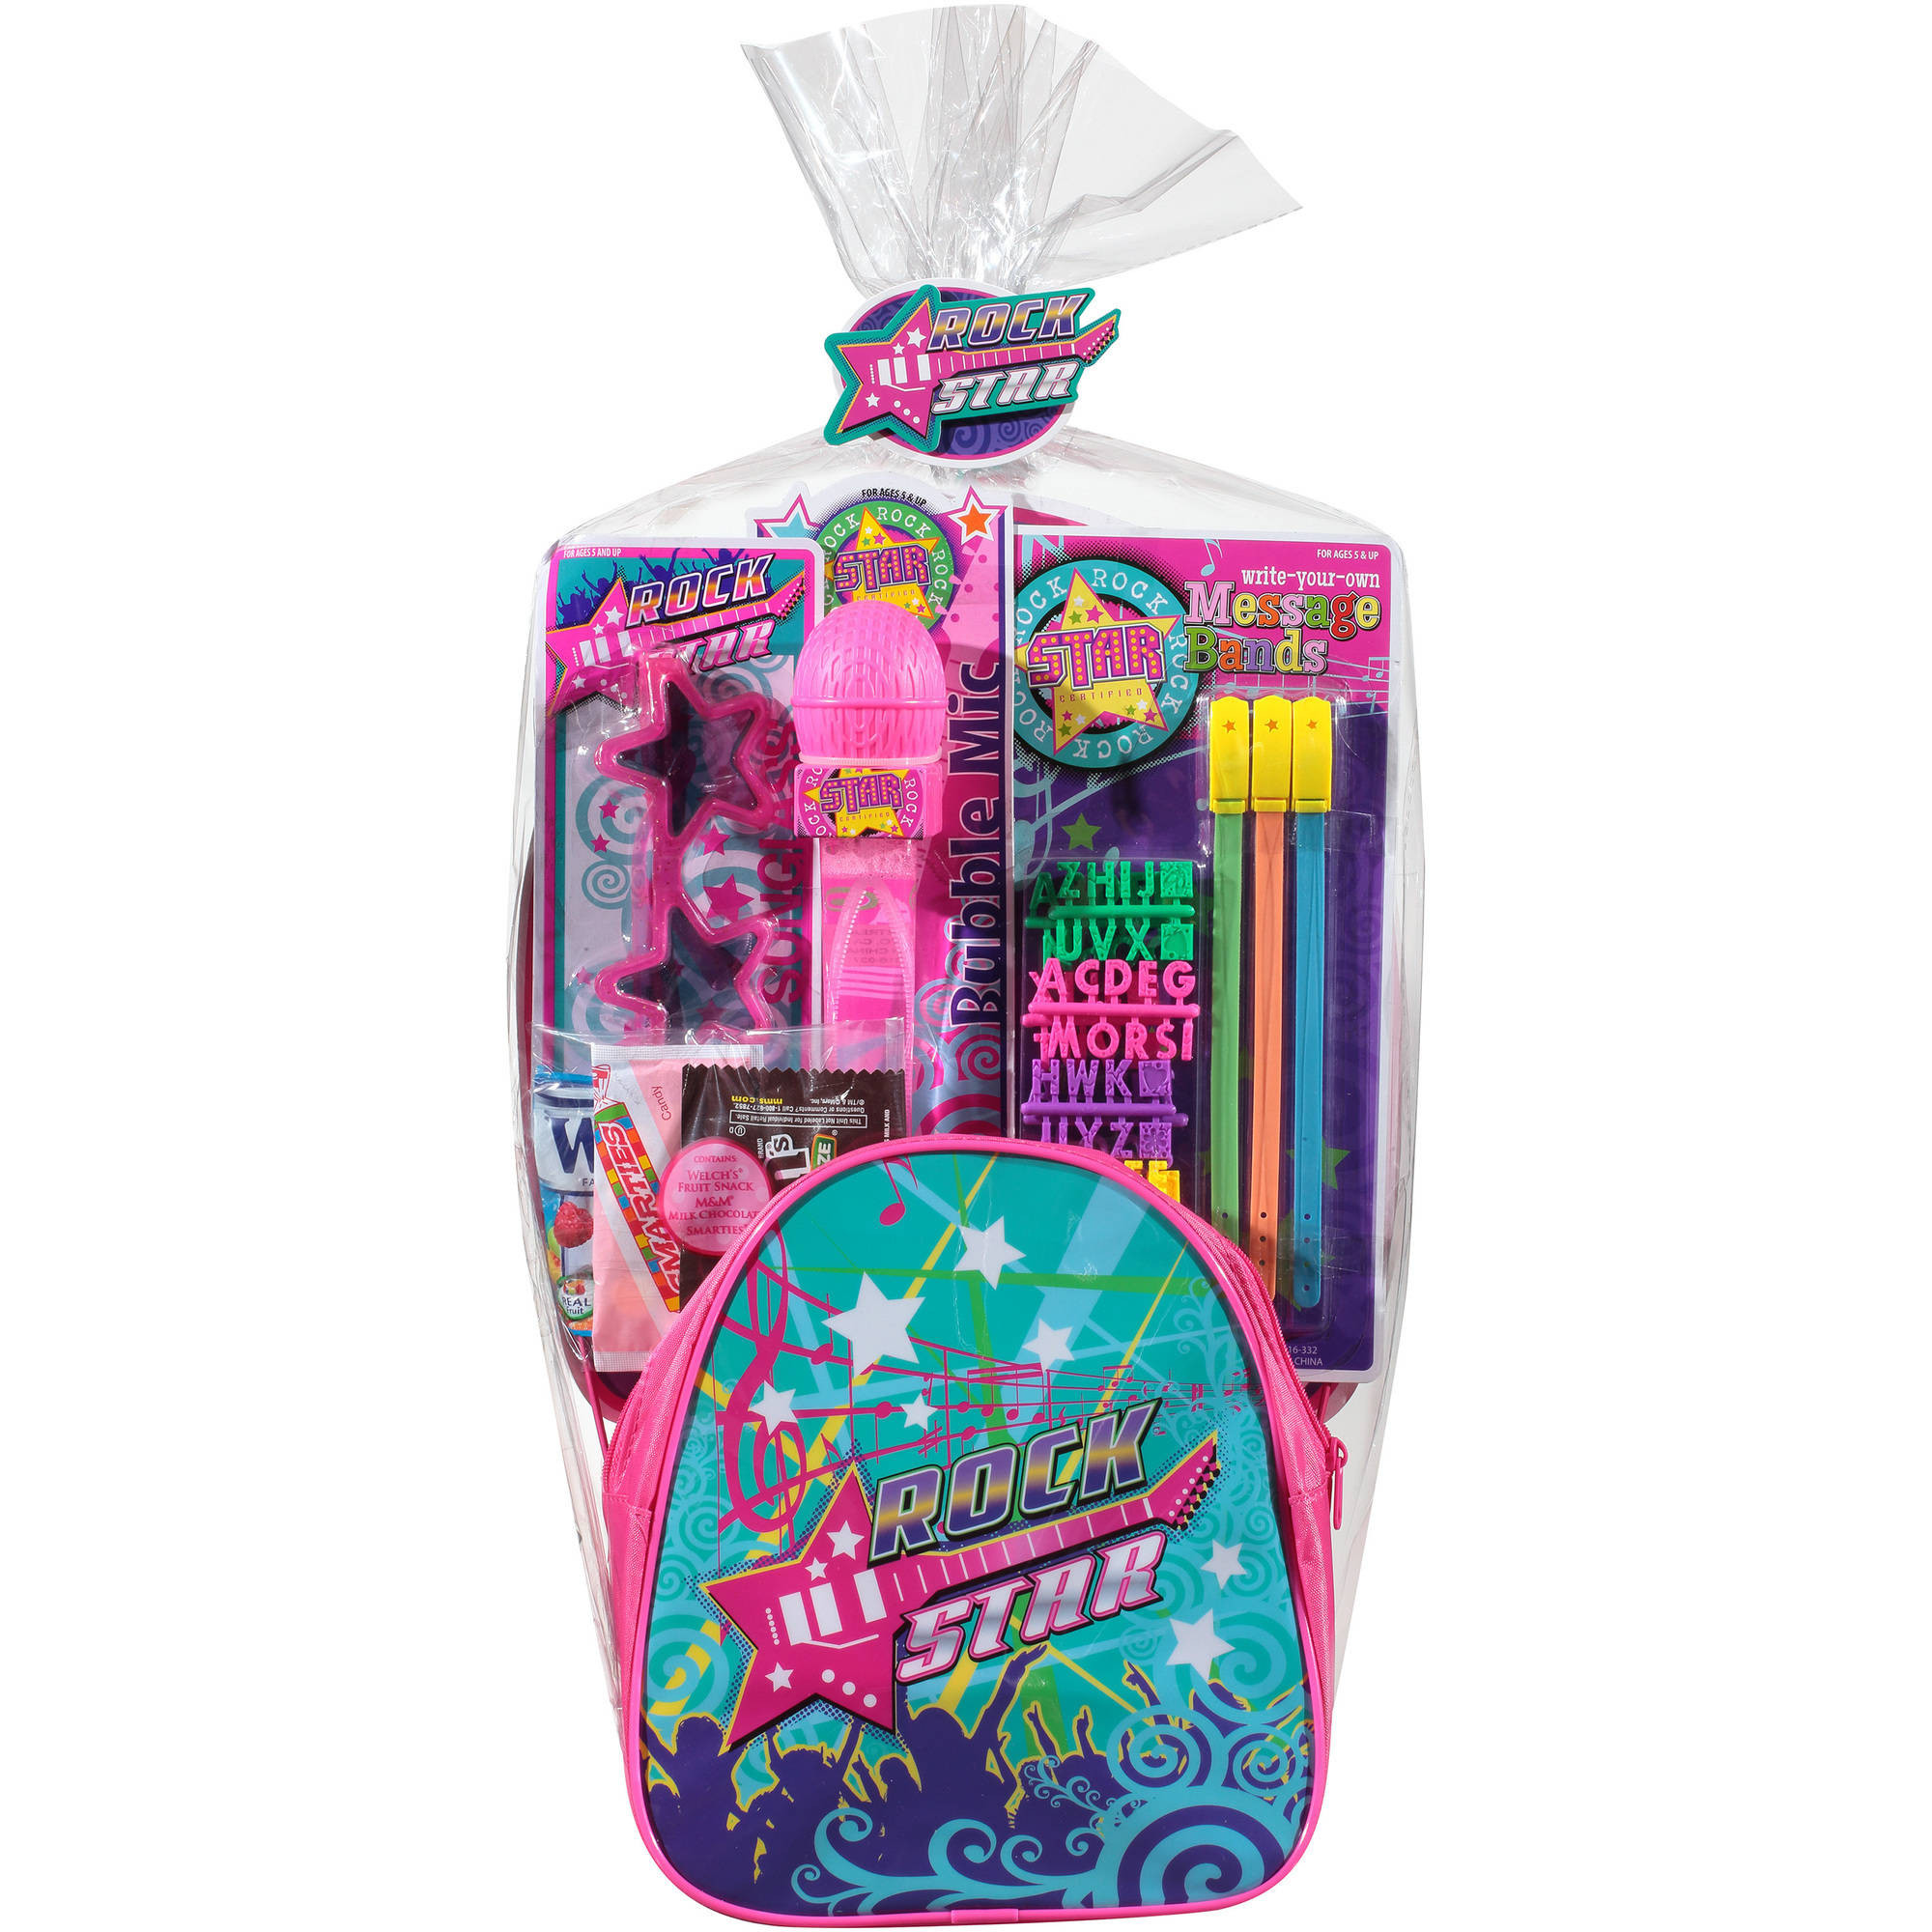 Walmart Easter Gifts
 Wondertreats Rock Star with Toys and Assorted Can s